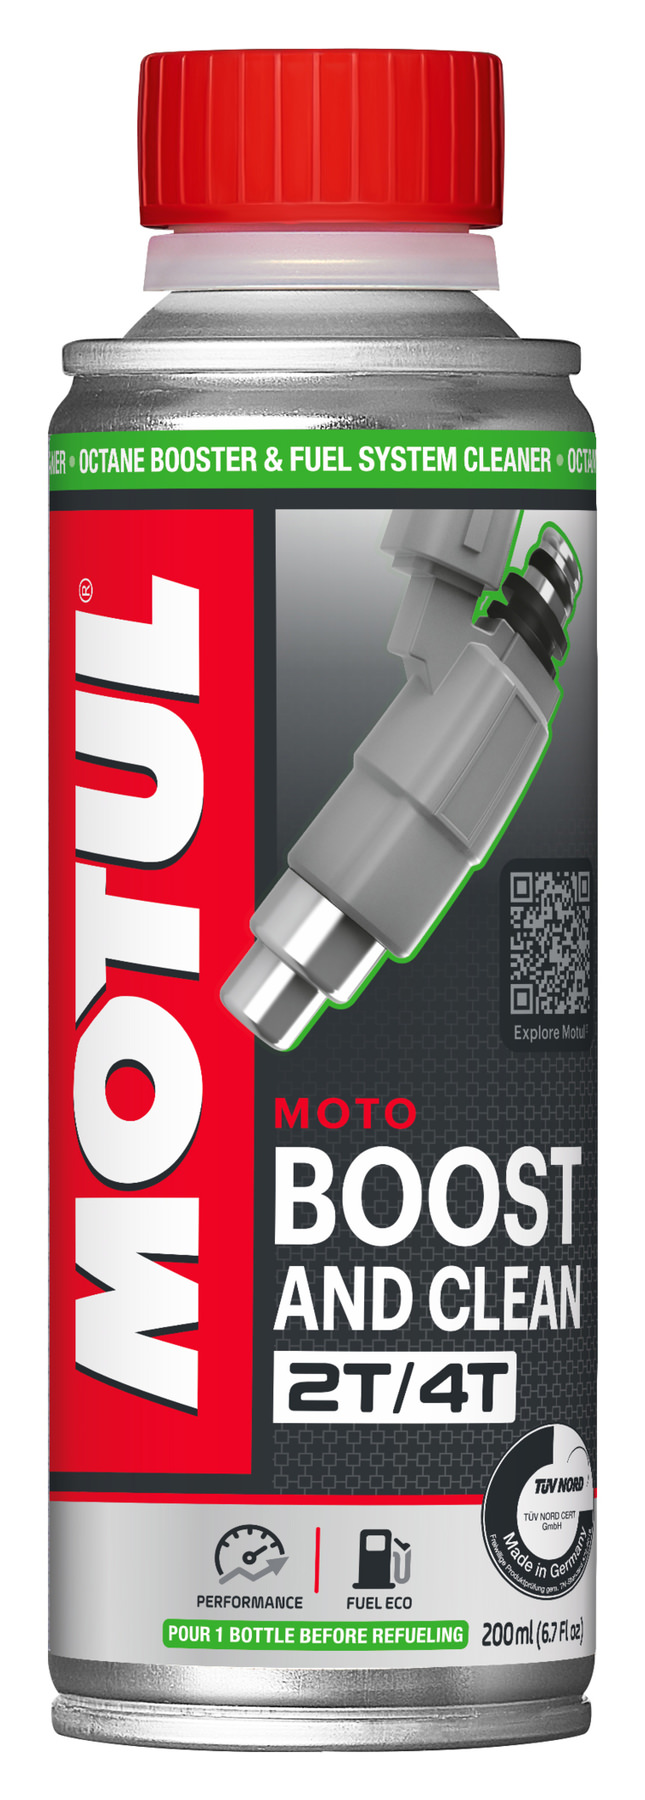 Pulitore motore boost and clean 2t/4t